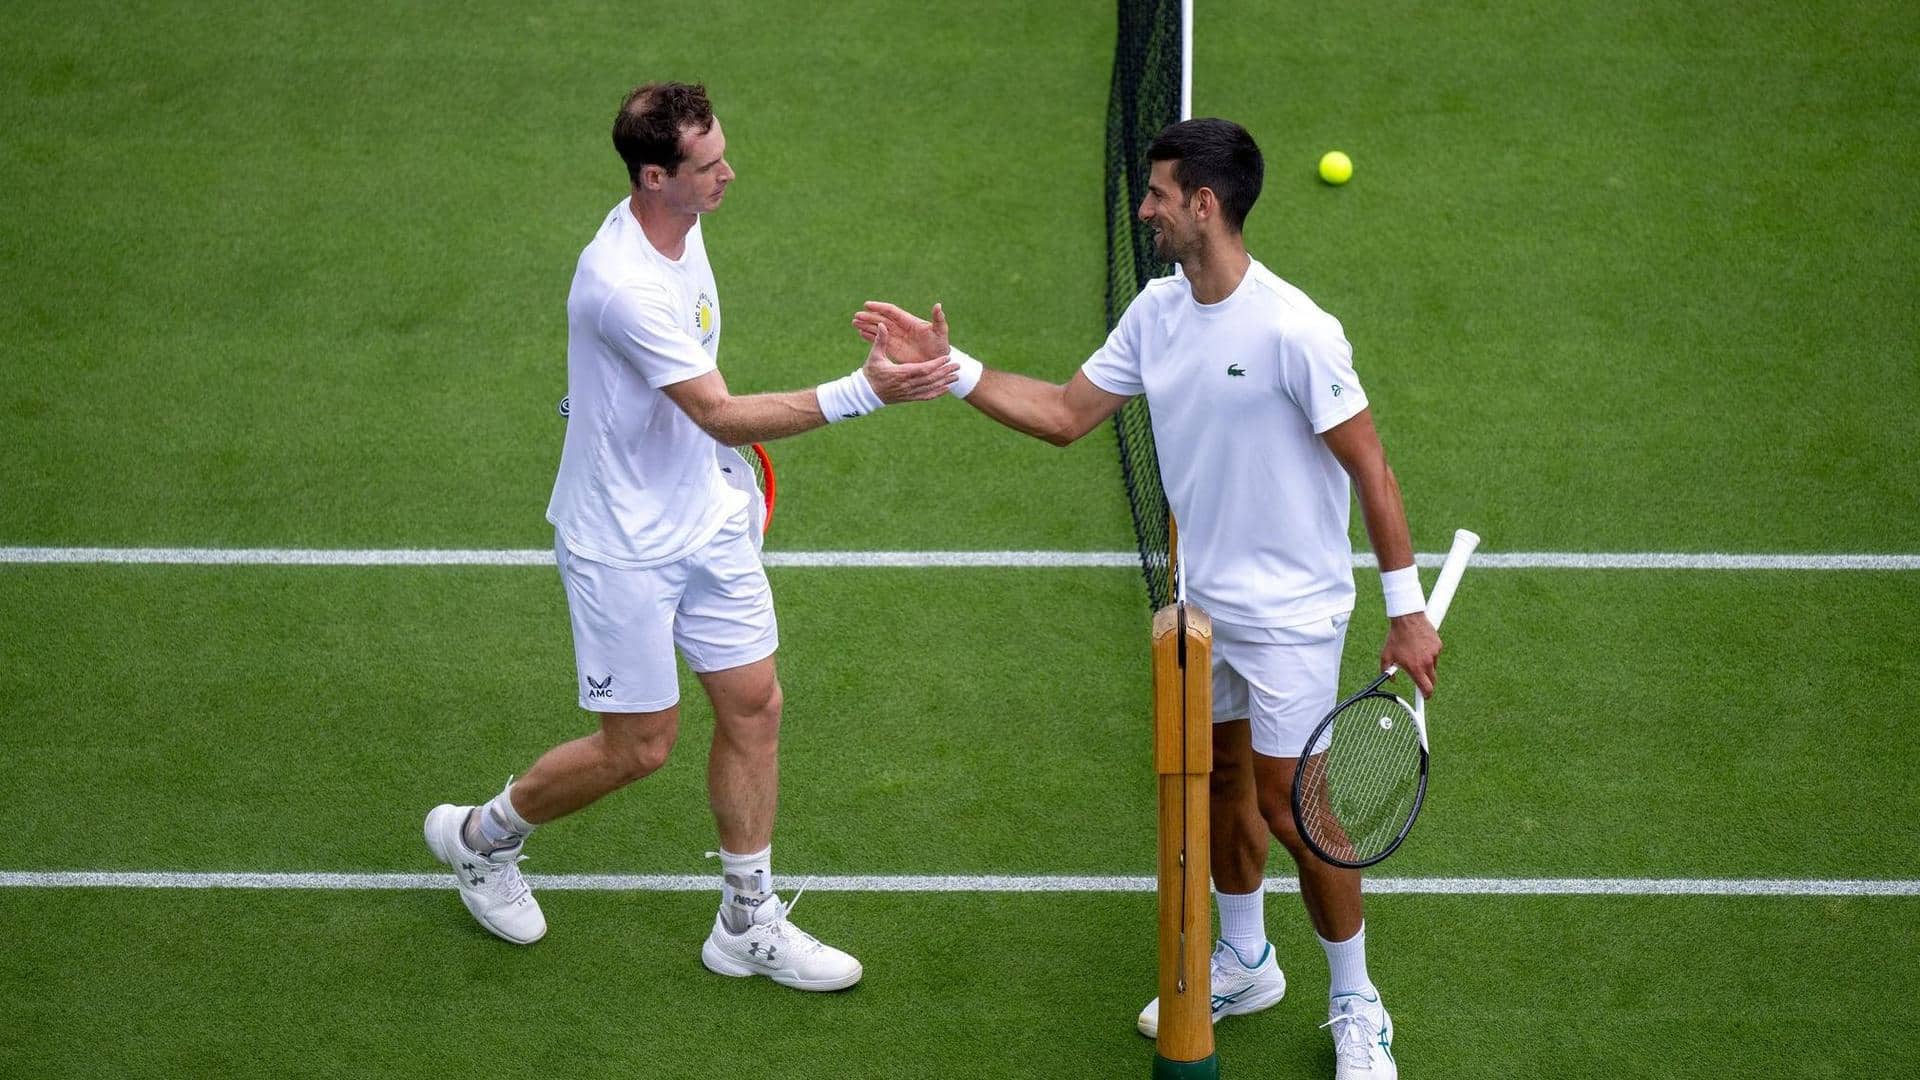 Decoding the stats of Andy Murray at Wimbledon